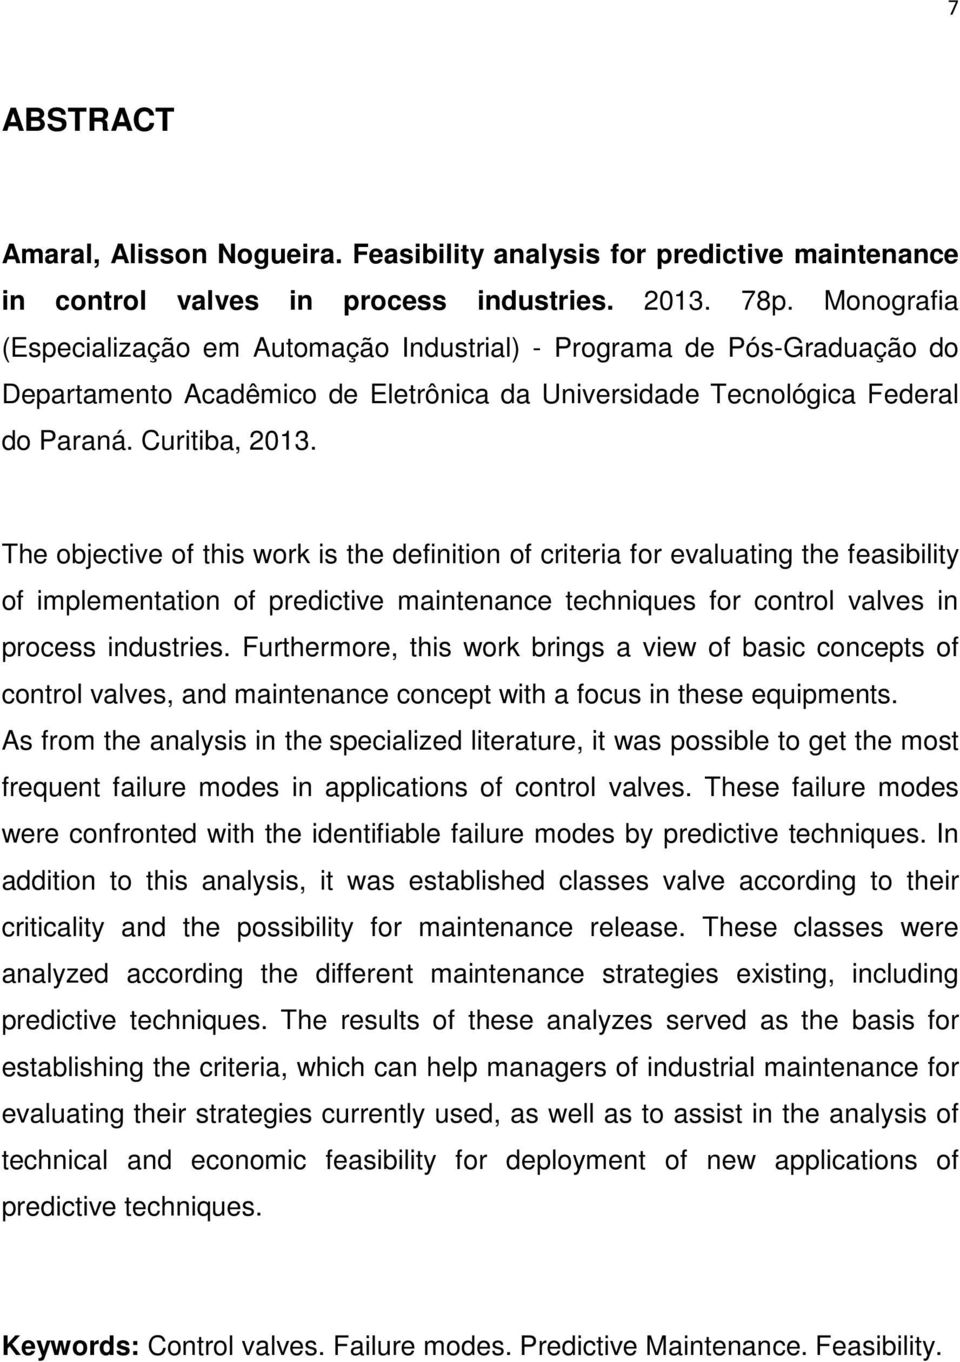 The objective of this work is the definition of criteria for evaluating the feasibility of implementation of predictive maintenance techniques for control valves in process industries.